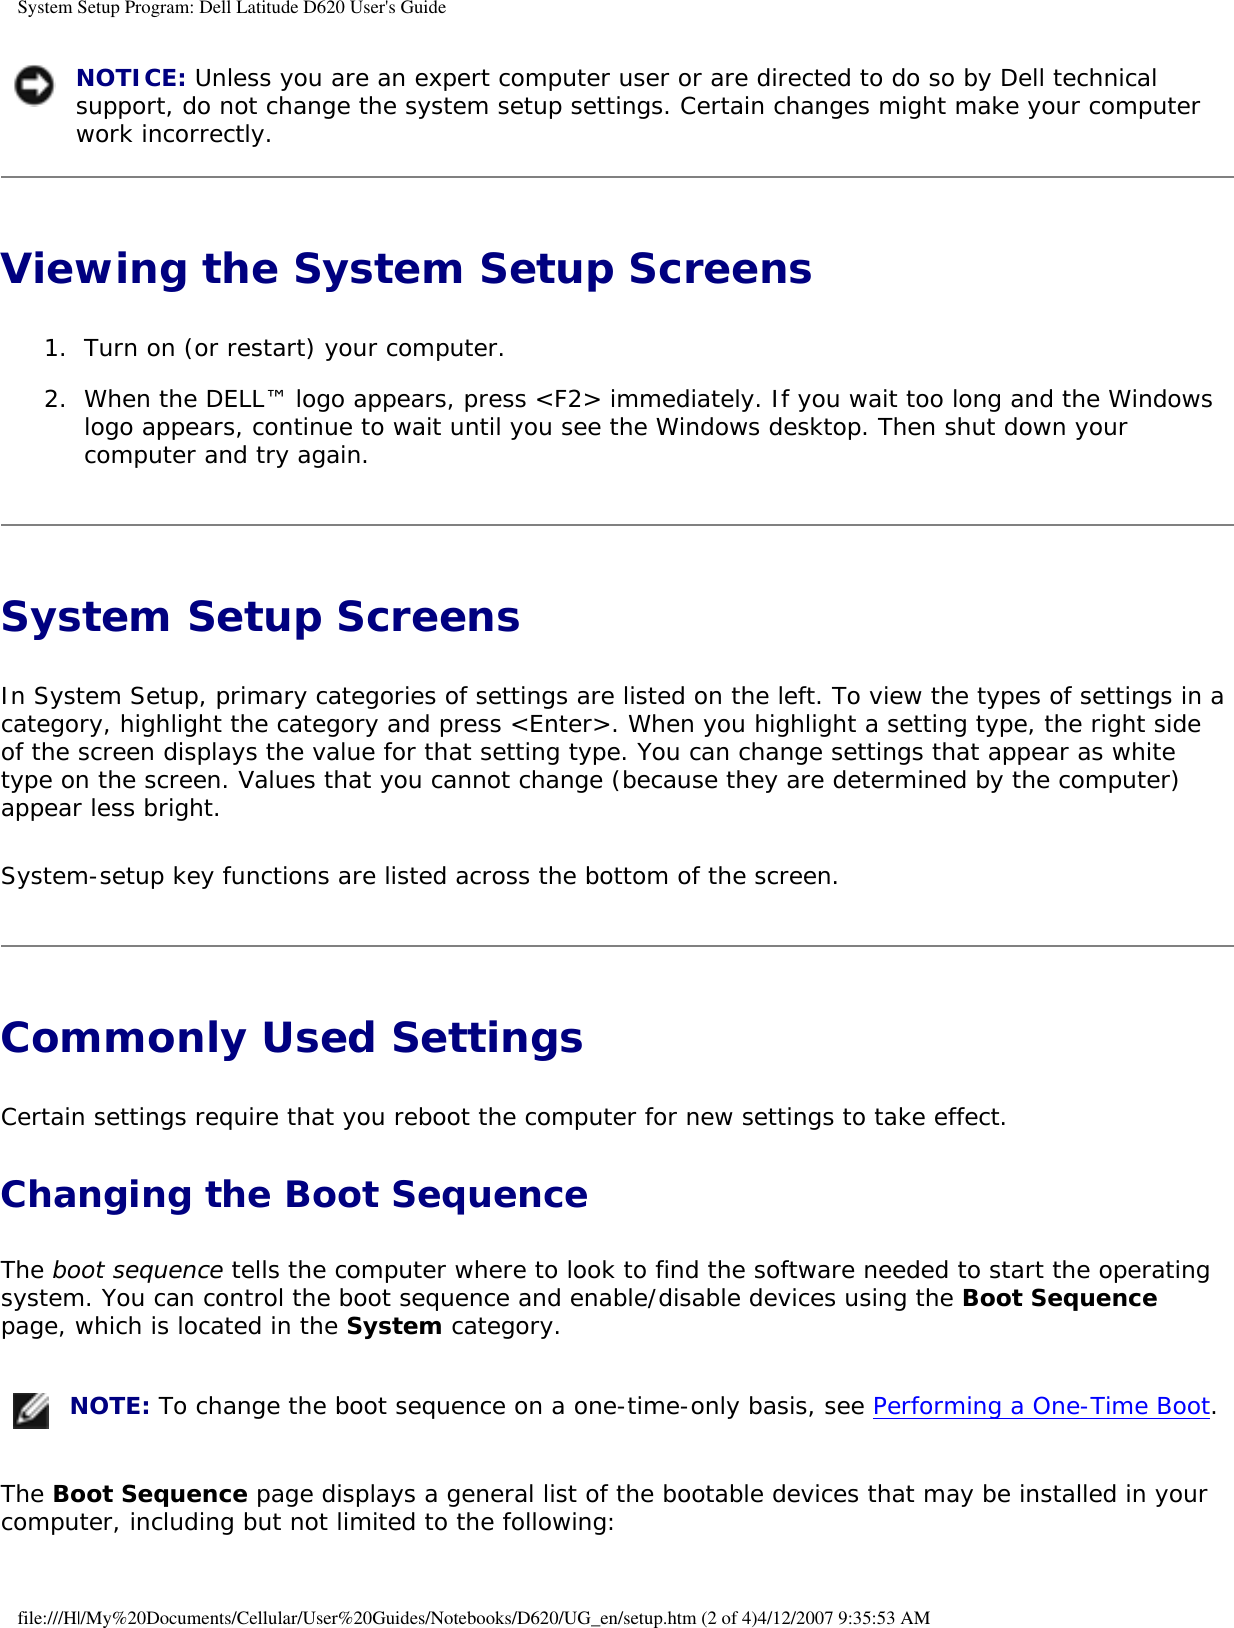 System Setup Program: Dell Latitude D620 User&apos;s Guide NOTICE: Unless you are an expert computer user or are directed to do so by Dell technical support, do not change the system setup settings. Certain changes might make your computer work incorrectly. Viewing the System Setup Screens 1.  Turn on (or restart) your computer.   2.  When the DELL™ logo appears, press &lt;F2&gt; immediately. If you wait too long and the Windows logo appears, continue to wait until you see the Windows desktop. Then shut down your computer and try again.   System Setup Screens In System Setup, primary categories of settings are listed on the left. To view the types of settings in a category, highlight the category and press &lt;Enter&gt;. When you highlight a setting type, the right side of the screen displays the value for that setting type. You can change settings that appear as white type on the screen. Values that you cannot change (because they are determined by the computer) appear less bright.System-setup key functions are listed across the bottom of the screen.Commonly Used Settings Certain settings require that you reboot the computer for new settings to take effect.Changing the Boot SequenceThe boot sequence tells the computer where to look to find the software needed to start the operating system. You can control the boot sequence and enable/disable devices using the Boot Sequence page, which is located in the System category. NOTE: To change the boot sequence on a one-time-only basis, see Performing a One-Time Boot.The Boot Sequence page displays a general list of the bootable devices that may be installed in your computer, including but not limited to the following:file:///H|/My%20Documents/Cellular/User%20Guides/Notebooks/D620/UG_en/setup.htm (2 of 4)4/12/2007 9:35:53 AM